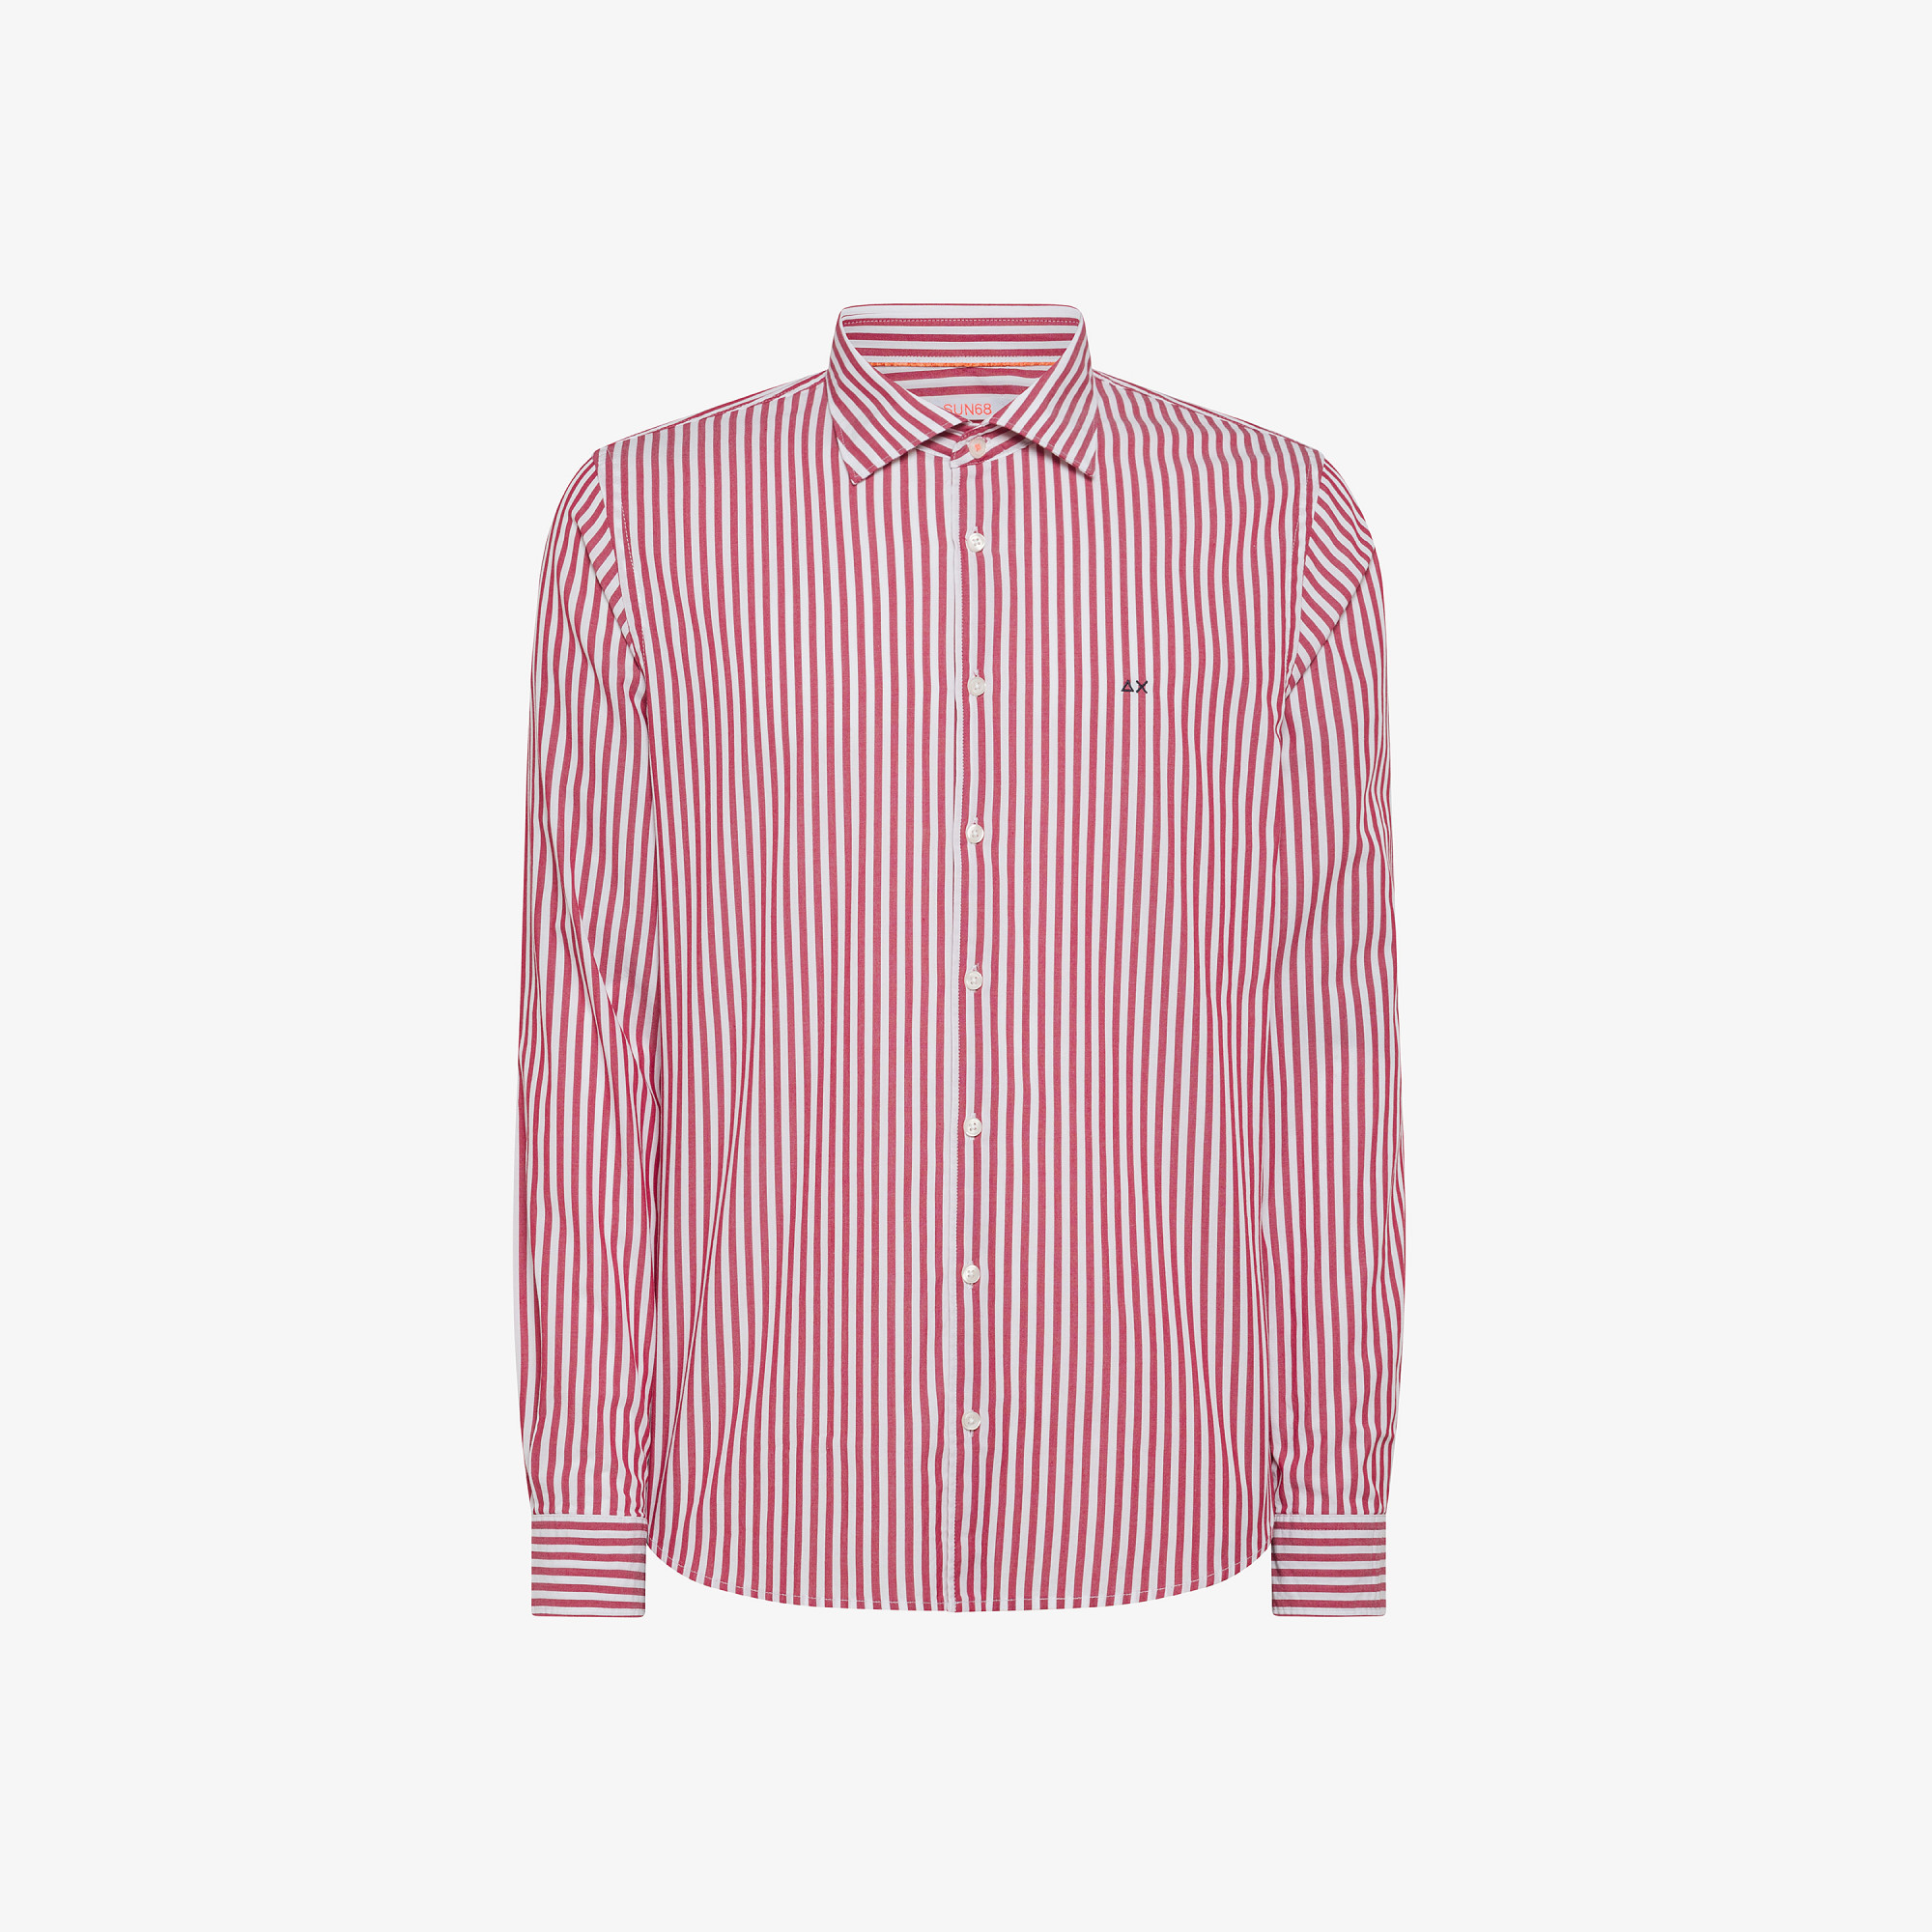 SHIRT CLASSIC STRIPE WITH FLUO DETAIL L/S BIANCO/ROSSO